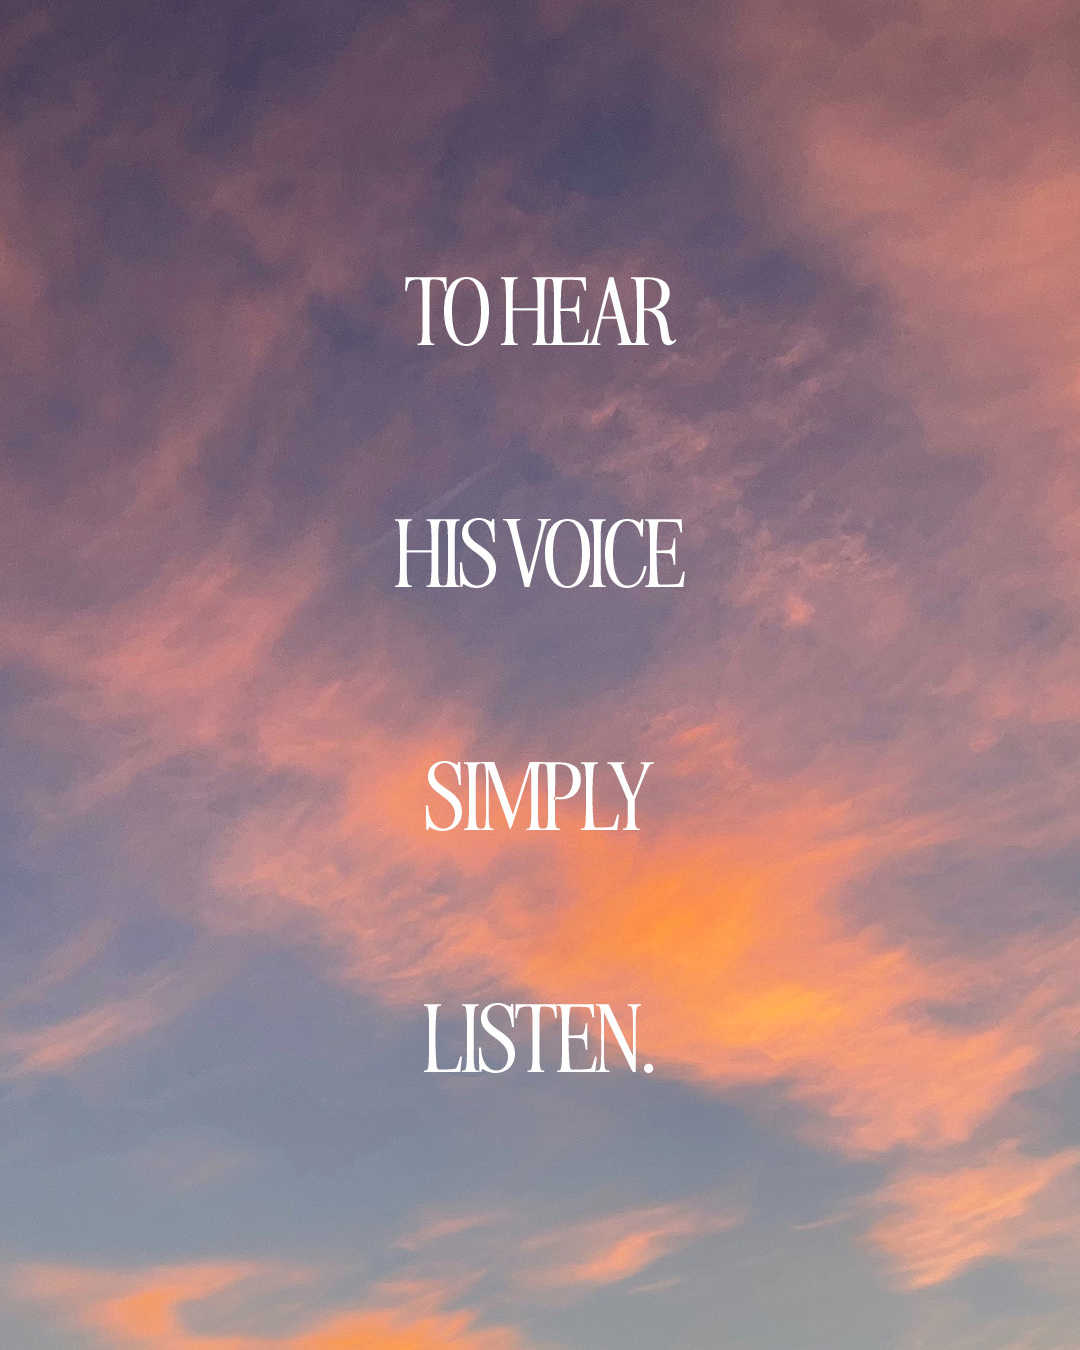 To hear His voice simply listen.